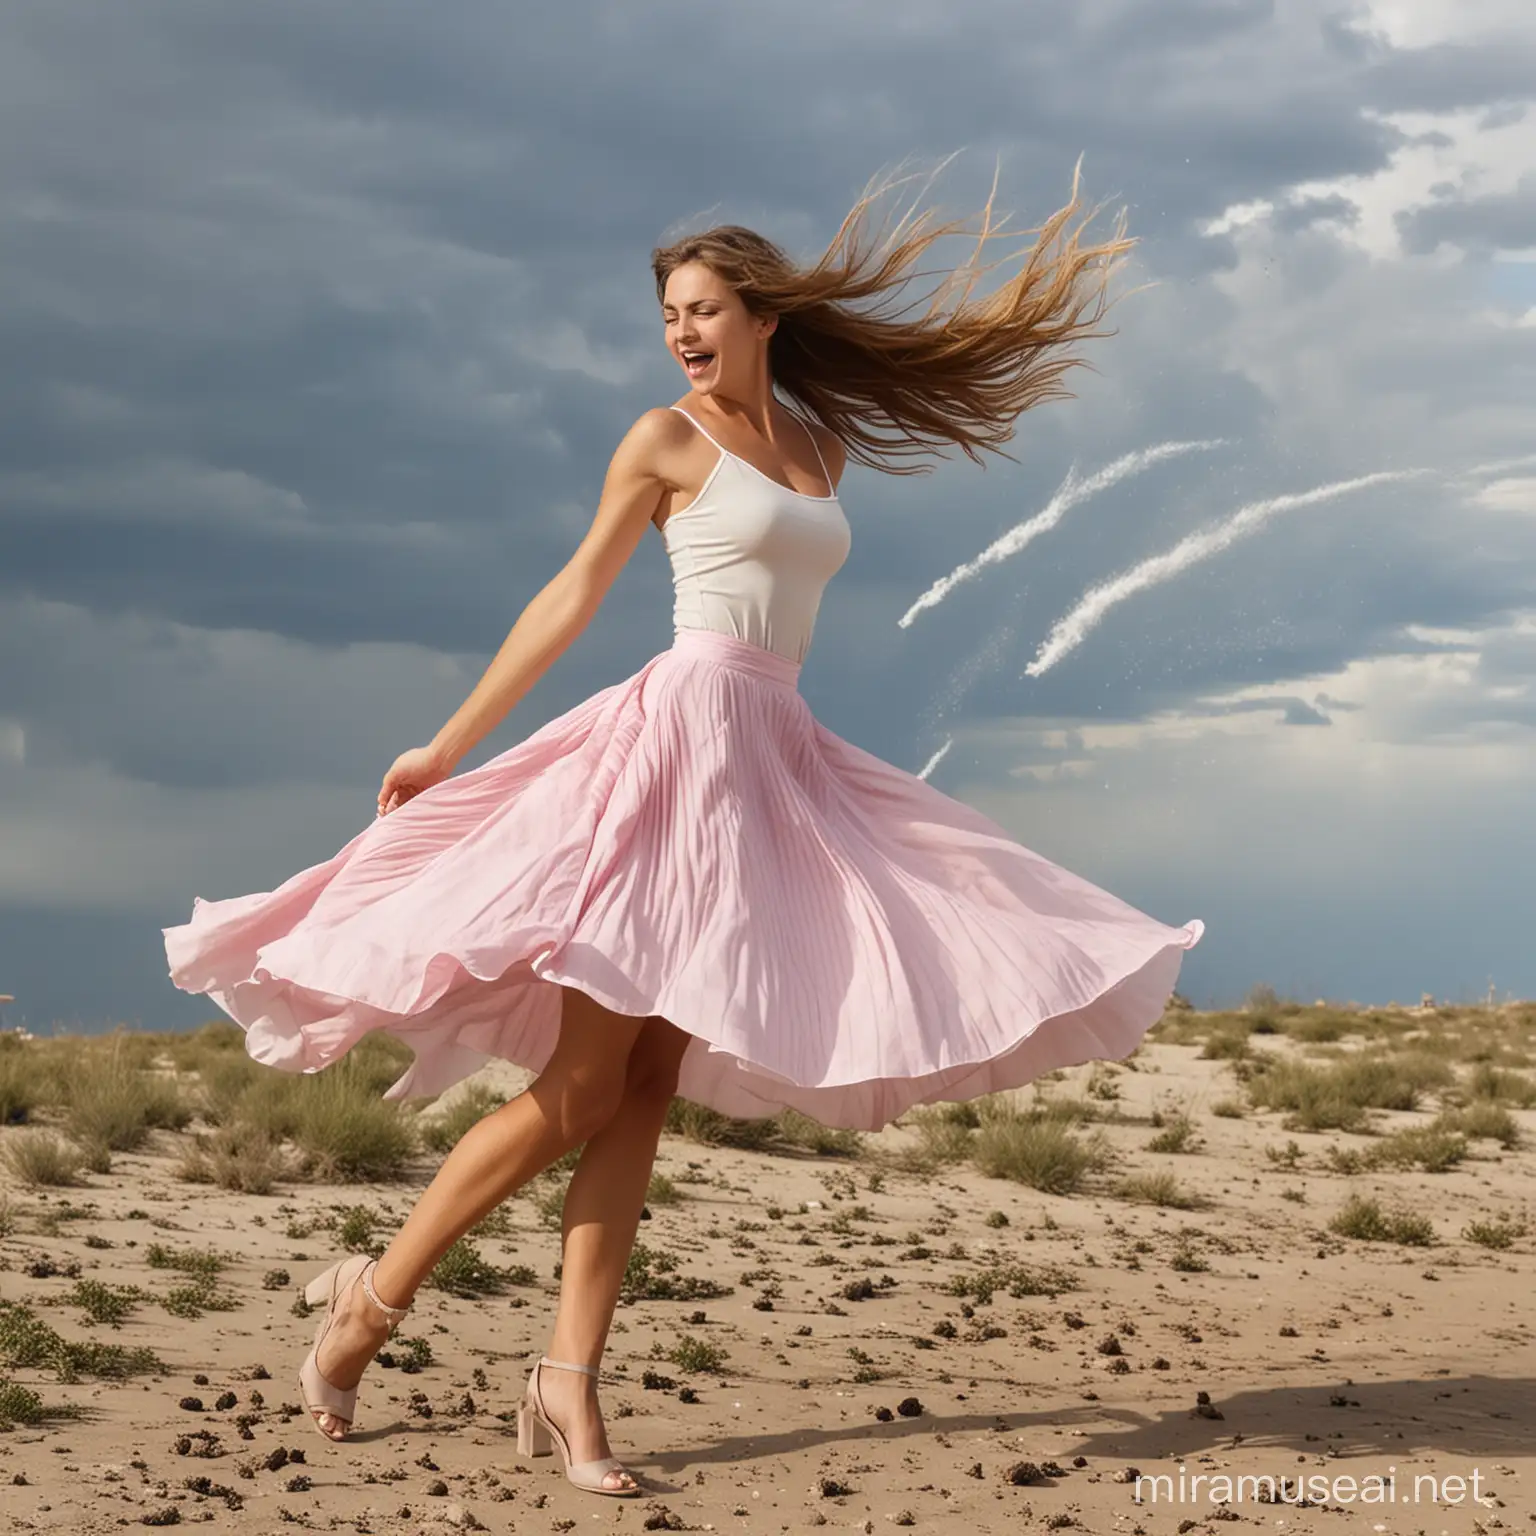 Beautiful Girls Skirt Blowing in Strong Wind